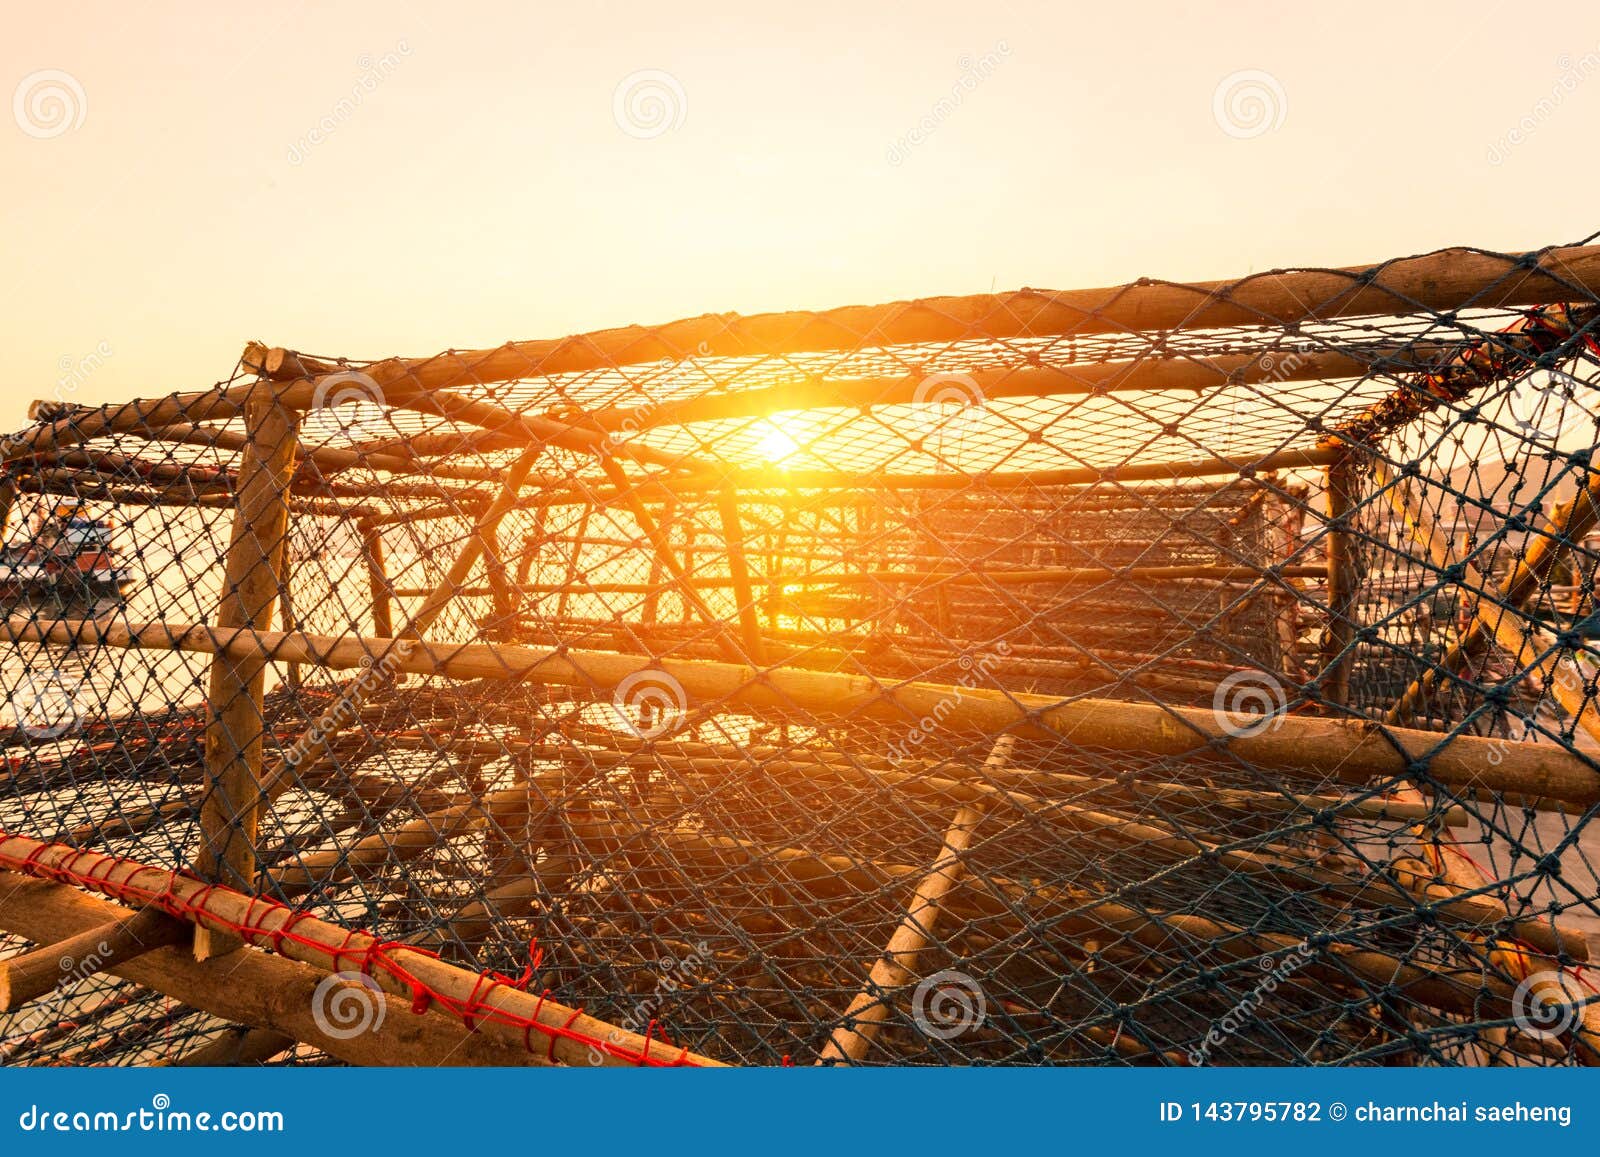 The Big Fish Trap on the Quay Near the Sea with Sunset Stock Photo